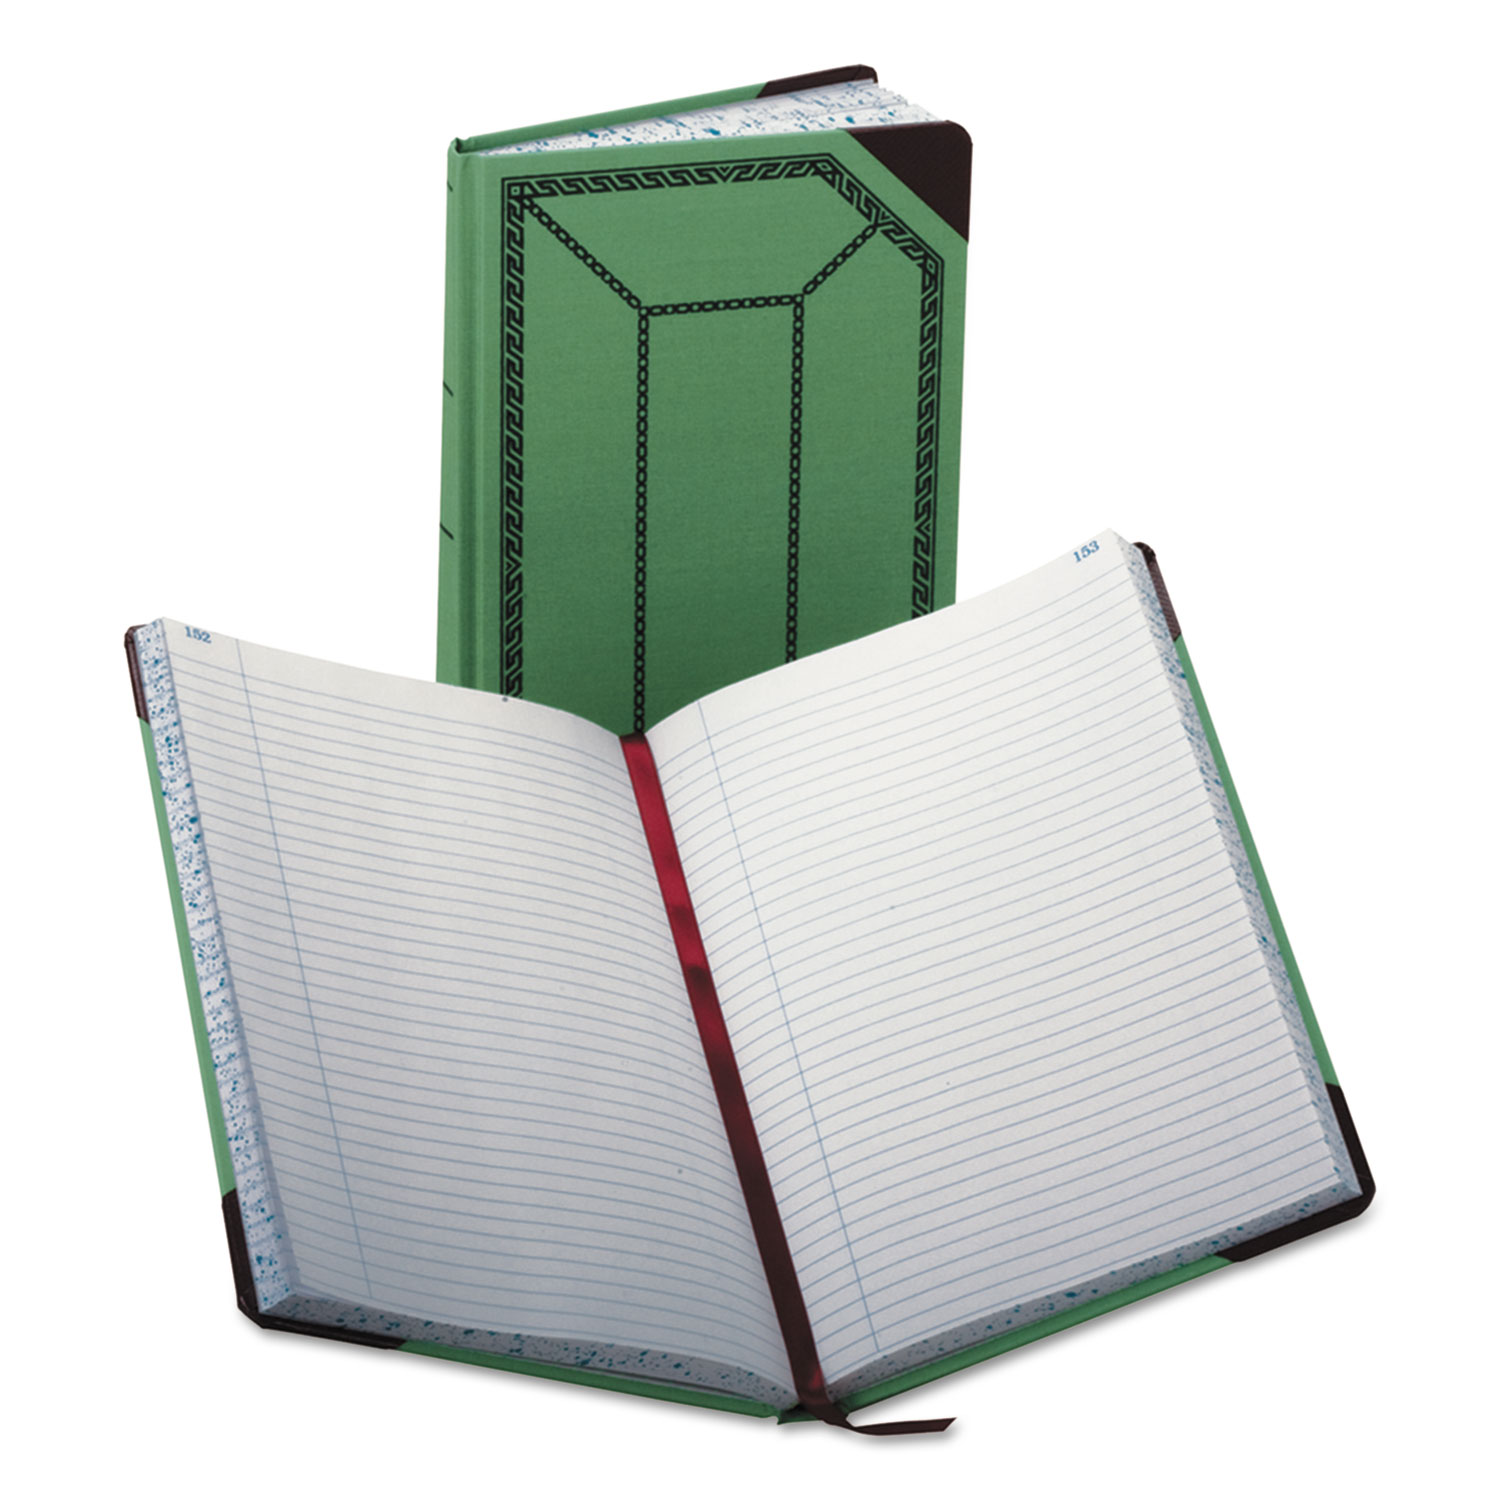  Boorum & Pease 67 1/8-300-R Record/Account Book, Record Rule, Green/Red, 300 Pages, 12 1/2 x 7 5/8 (BOR6718300R) 